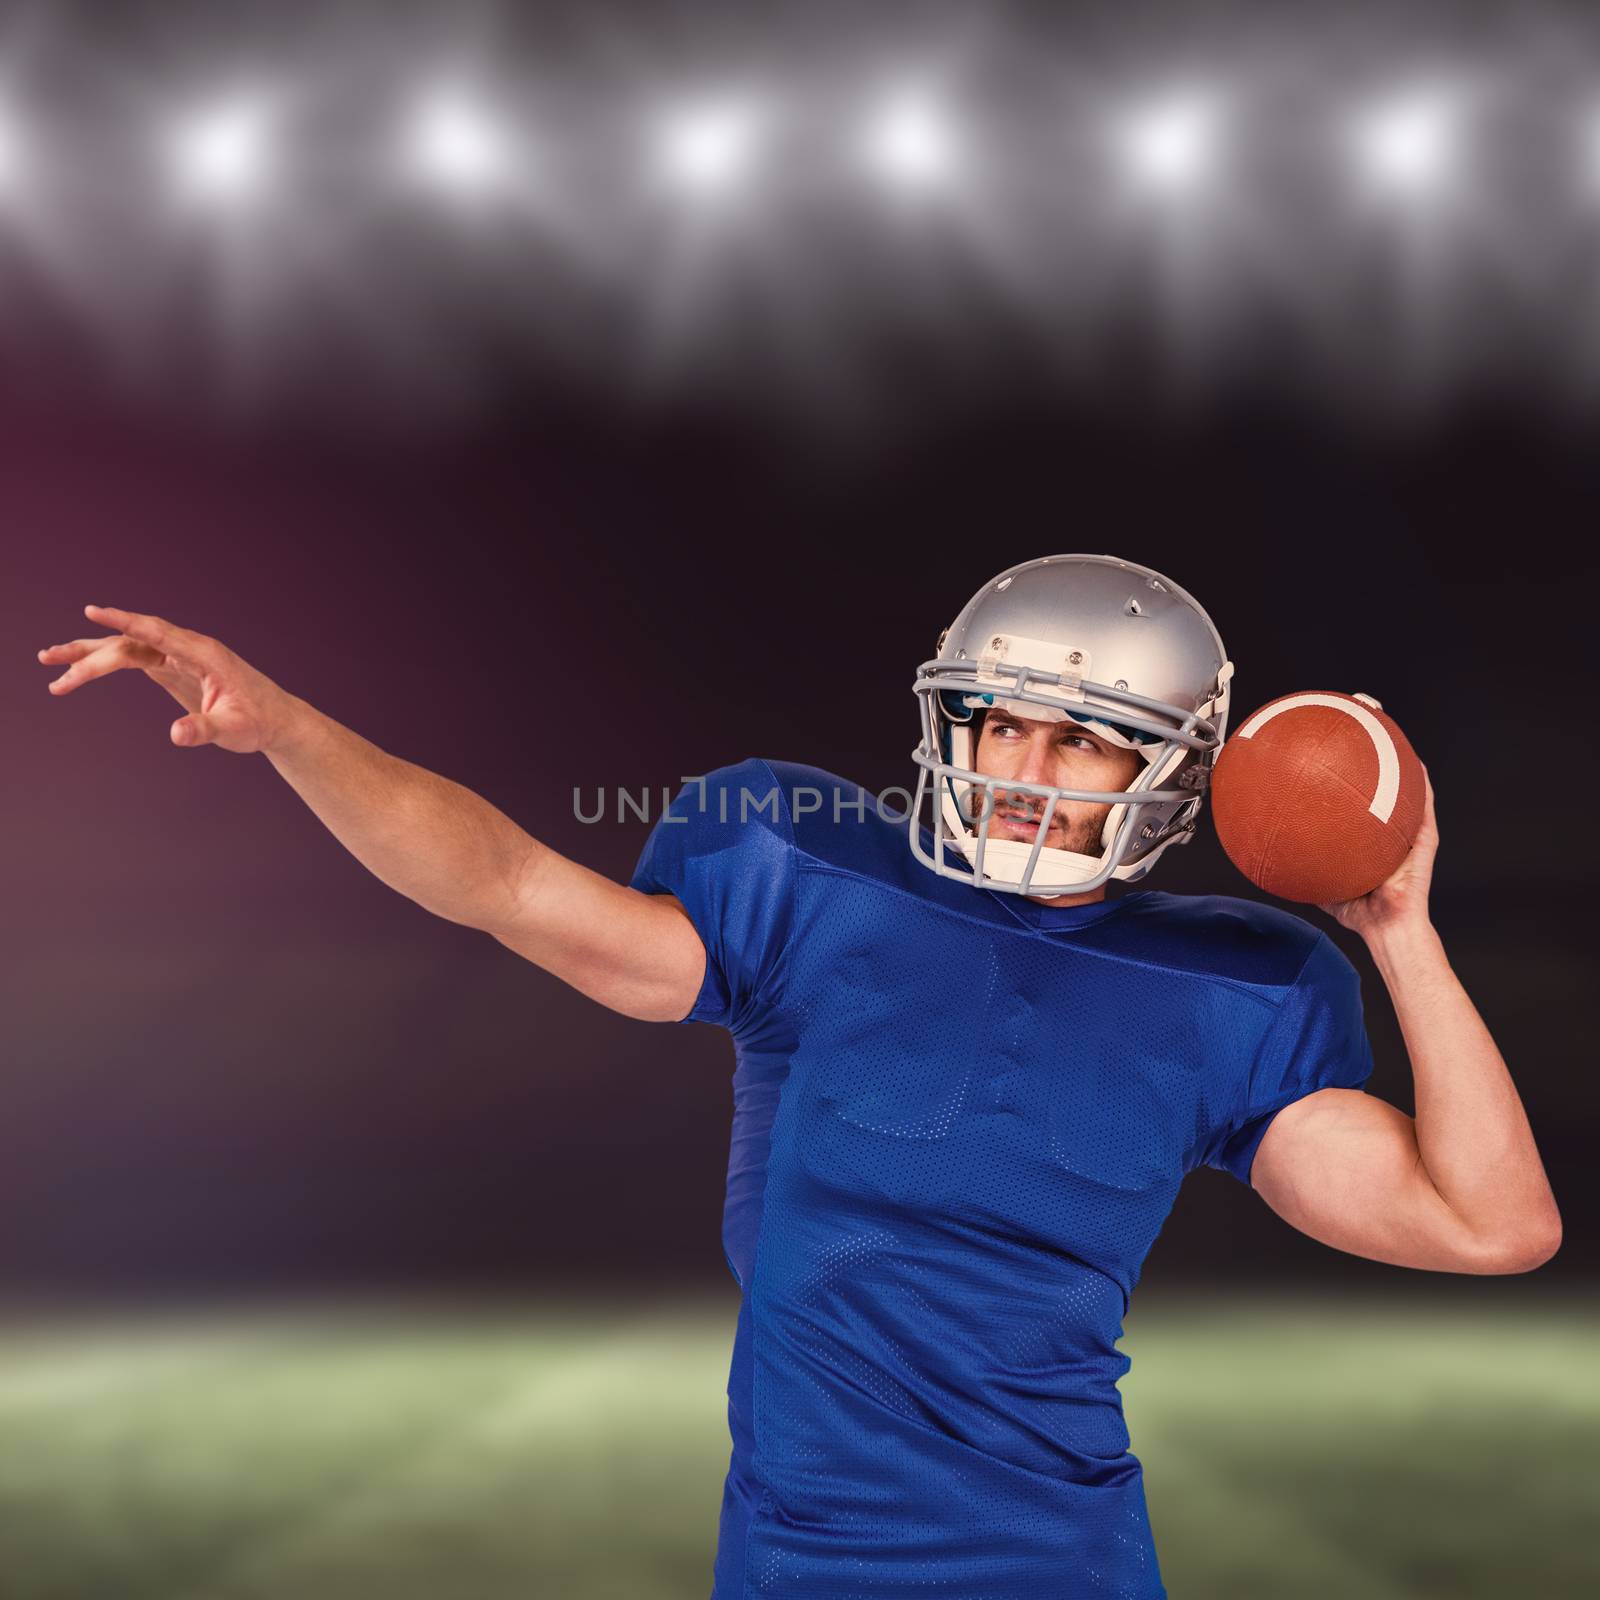 Composite image of american football player about to throw the ball by Wavebreakmedia